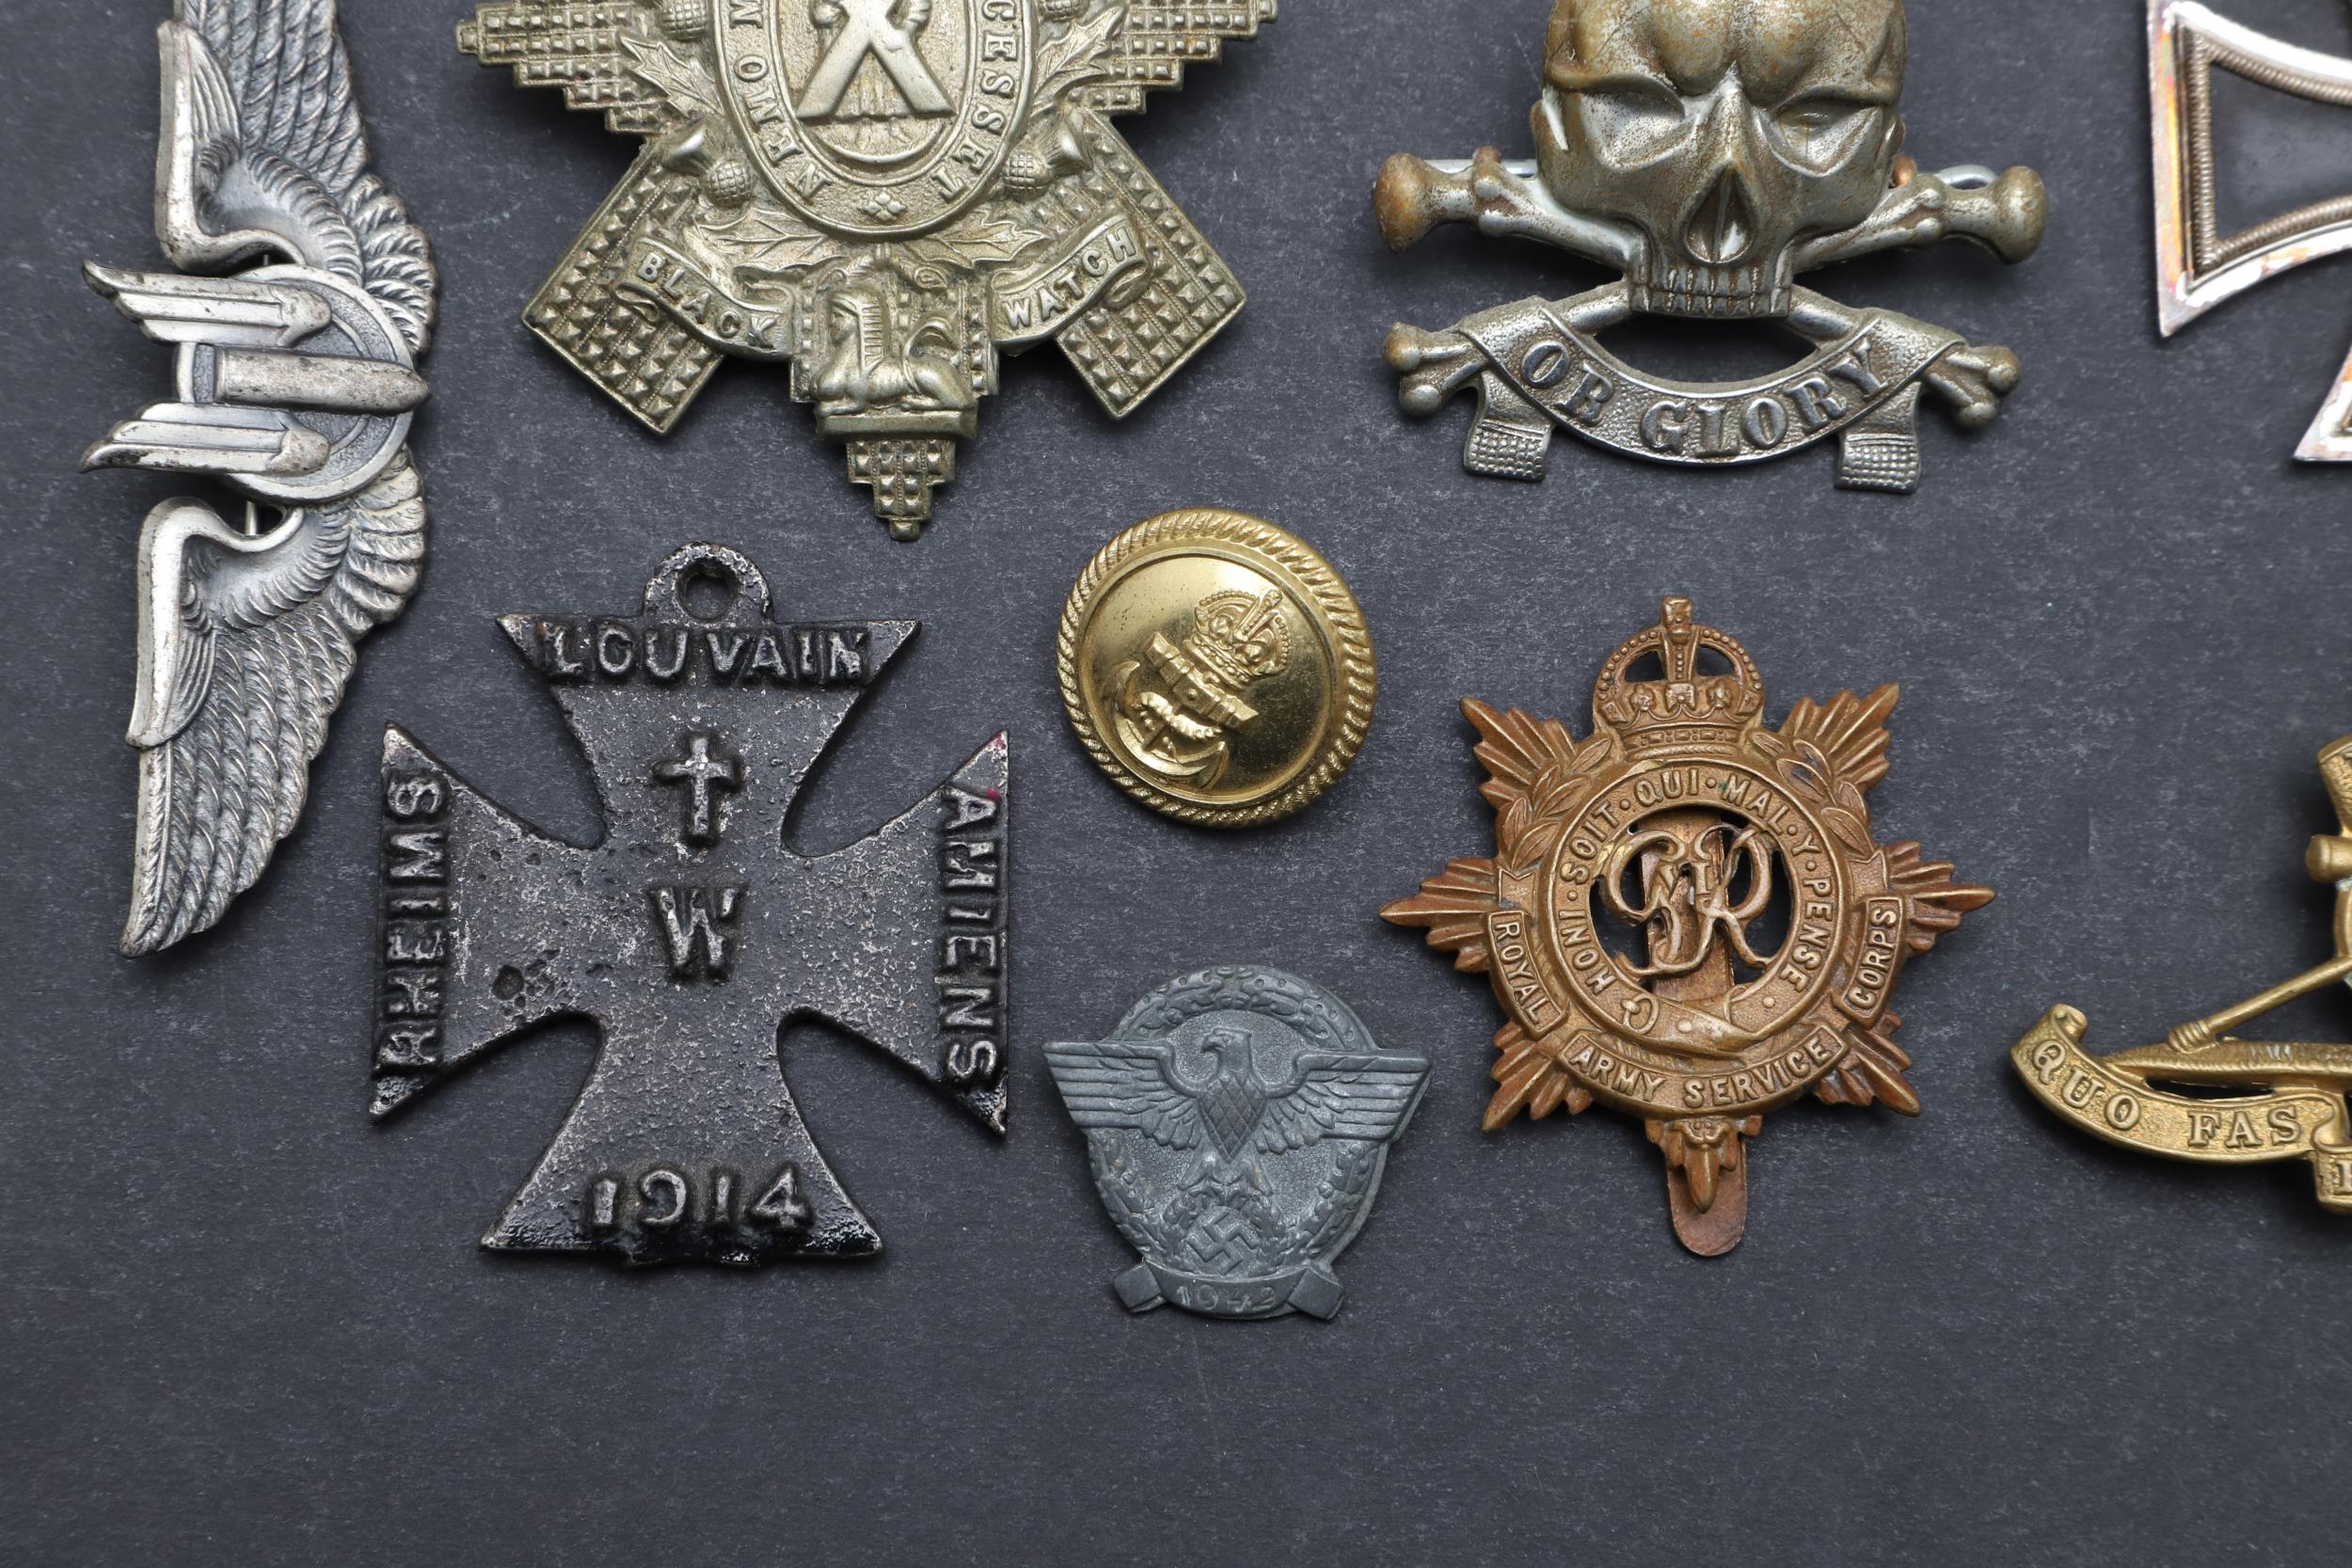 A COLLECTION OF SECOND WORLD WAR GERMAN AND BRITISH BADGES TO INCLUDE A WOUND BADGE. - Image 8 of 9